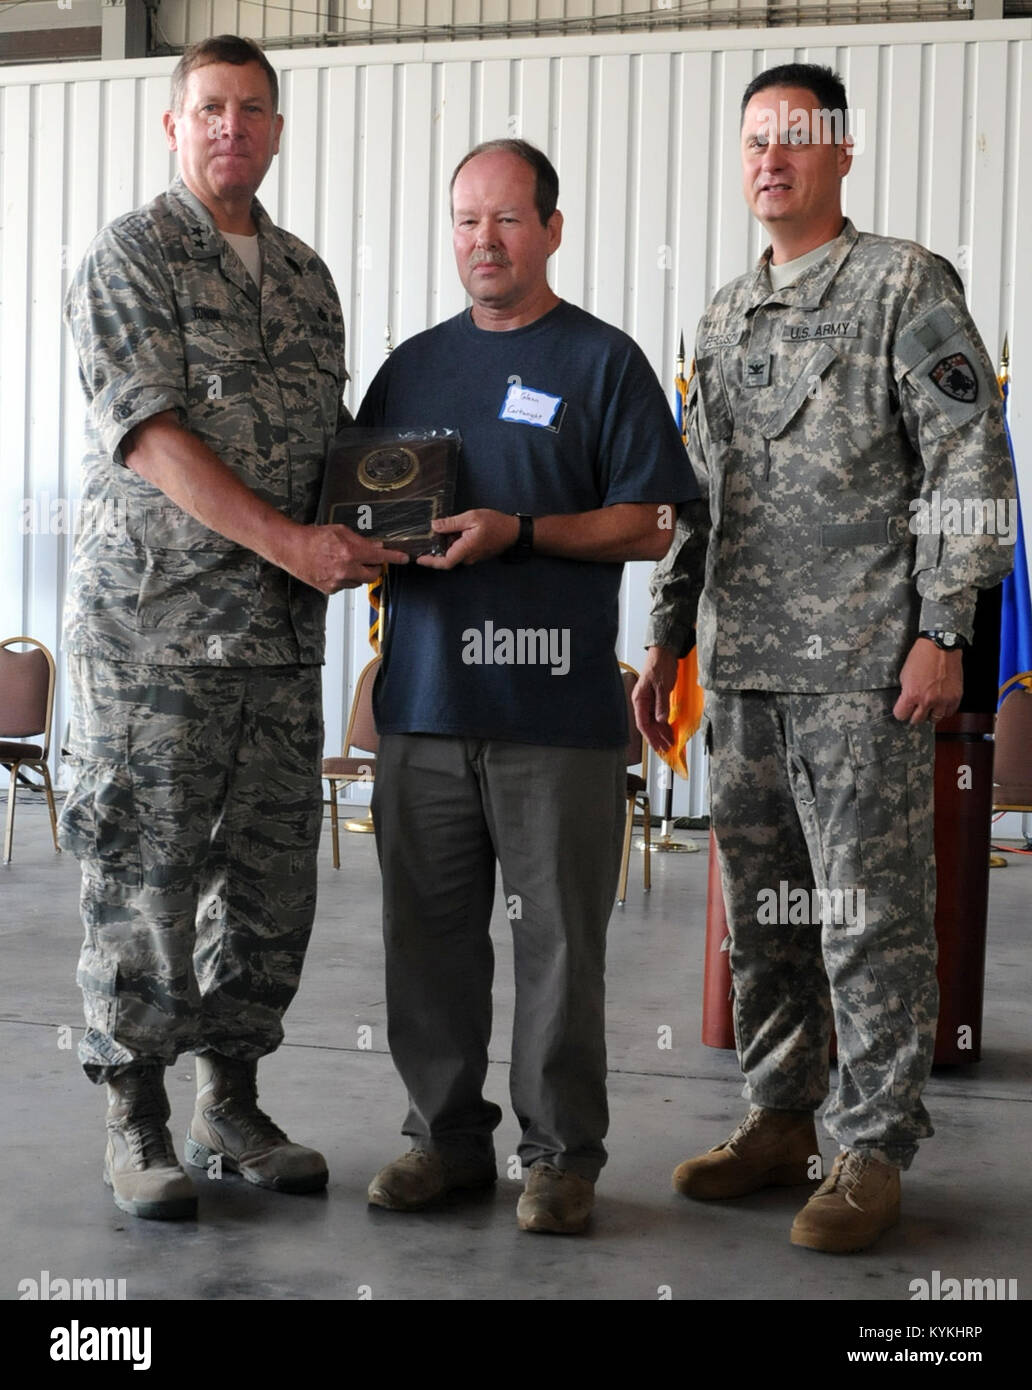 Kentucky's Adj. Gen., Maj. Gen. Edward Tonini, presents retired Staff Sgt. Glenn Cartwright the 30 year plauqe at an awards ceremony held July 9 at the Capital City Airport in Frankfort Ky.  (U.S. Army National Guard photo by Spc. Brandy Mort) Stock Photo